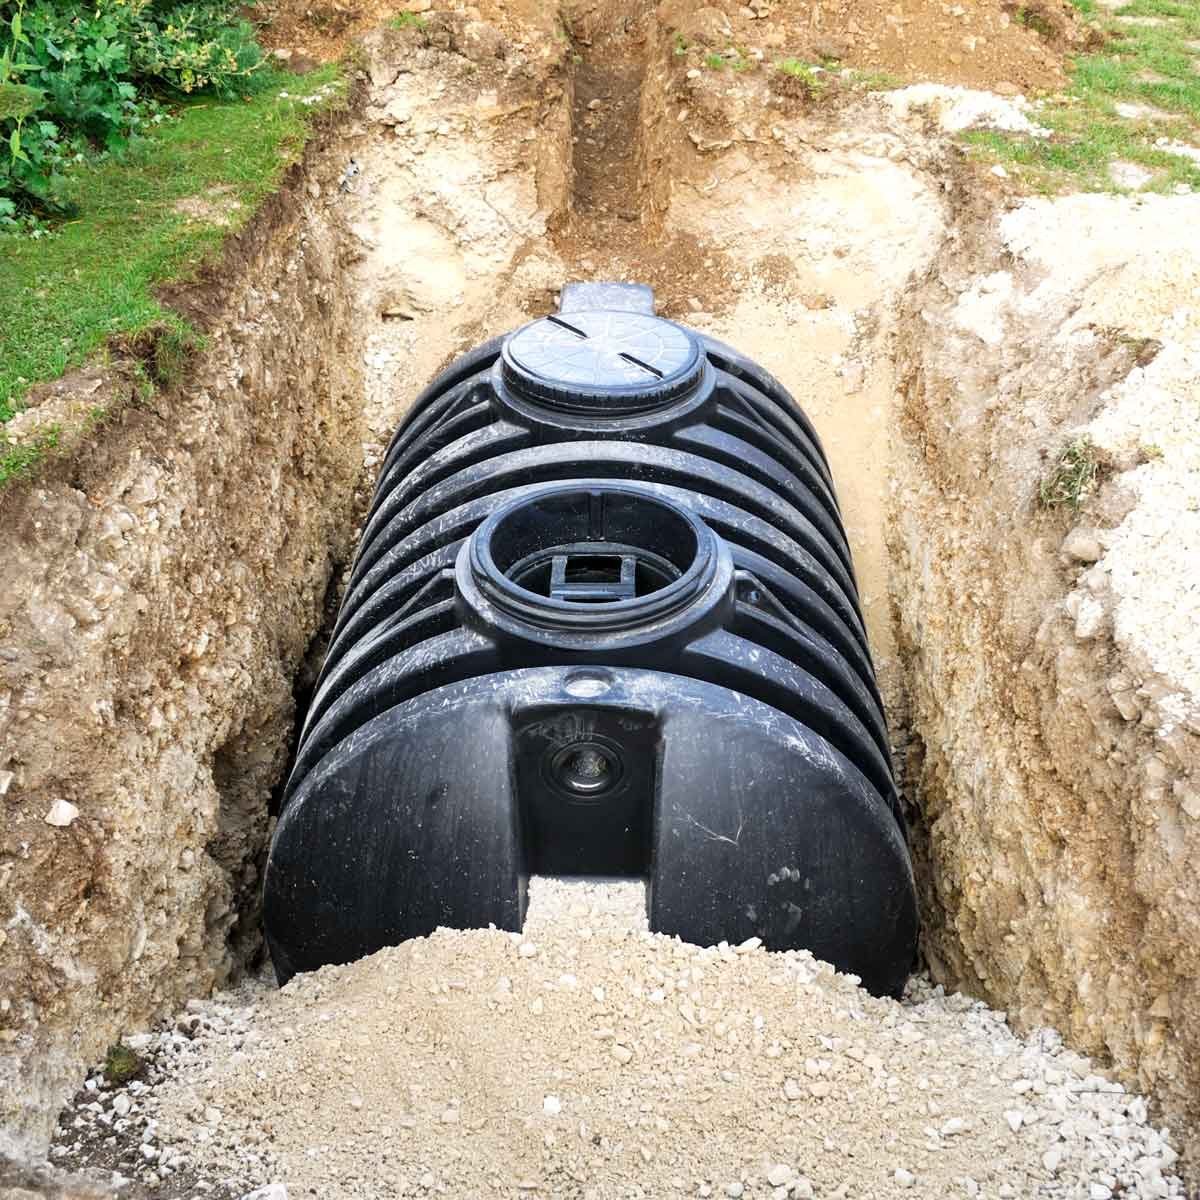 7 Tips to Take Care of Your Septic System | The Family Handyman